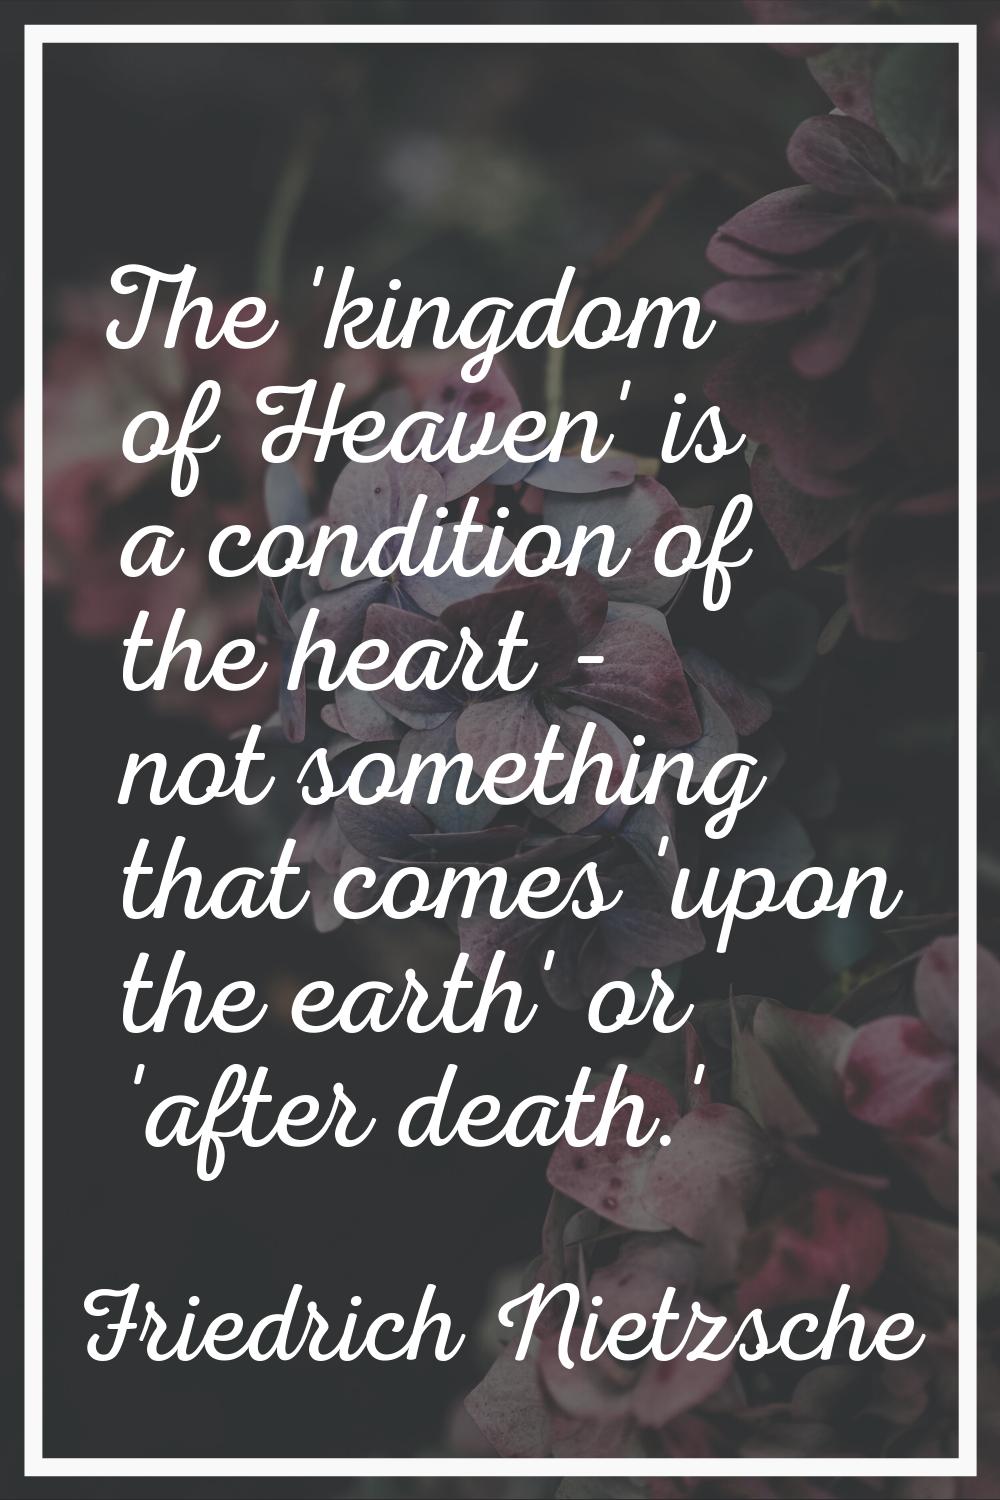 The 'kingdom of Heaven' is a condition of the heart - not something that comes 'upon the earth' or 